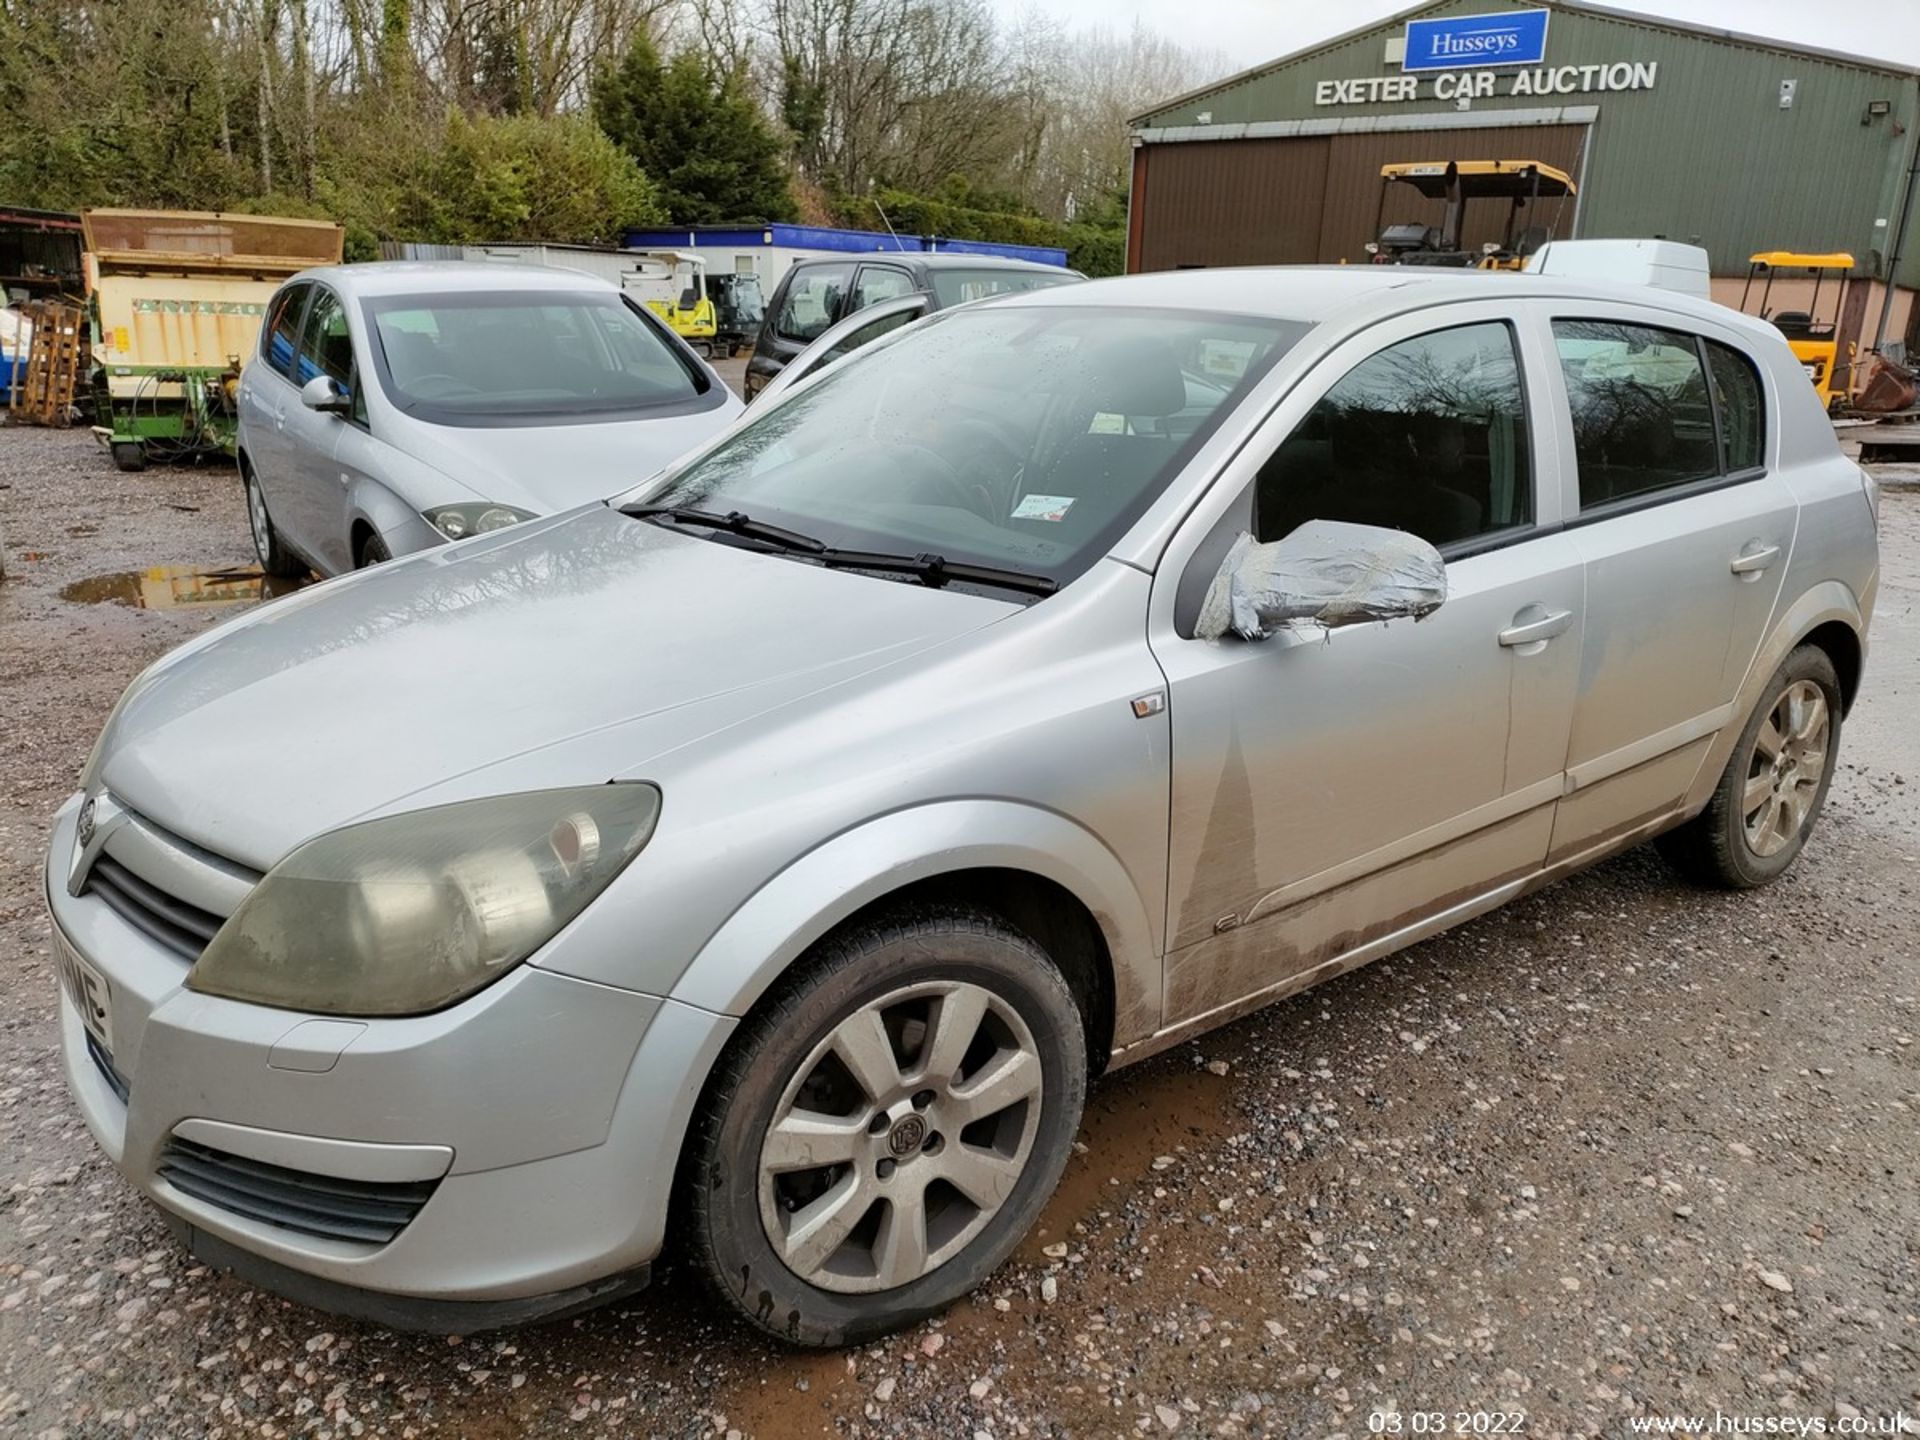 06/55 VAUXHALL ASTRA BREEZE - 1598cc 5dr Hatchback (Silver) - Image 5 of 23